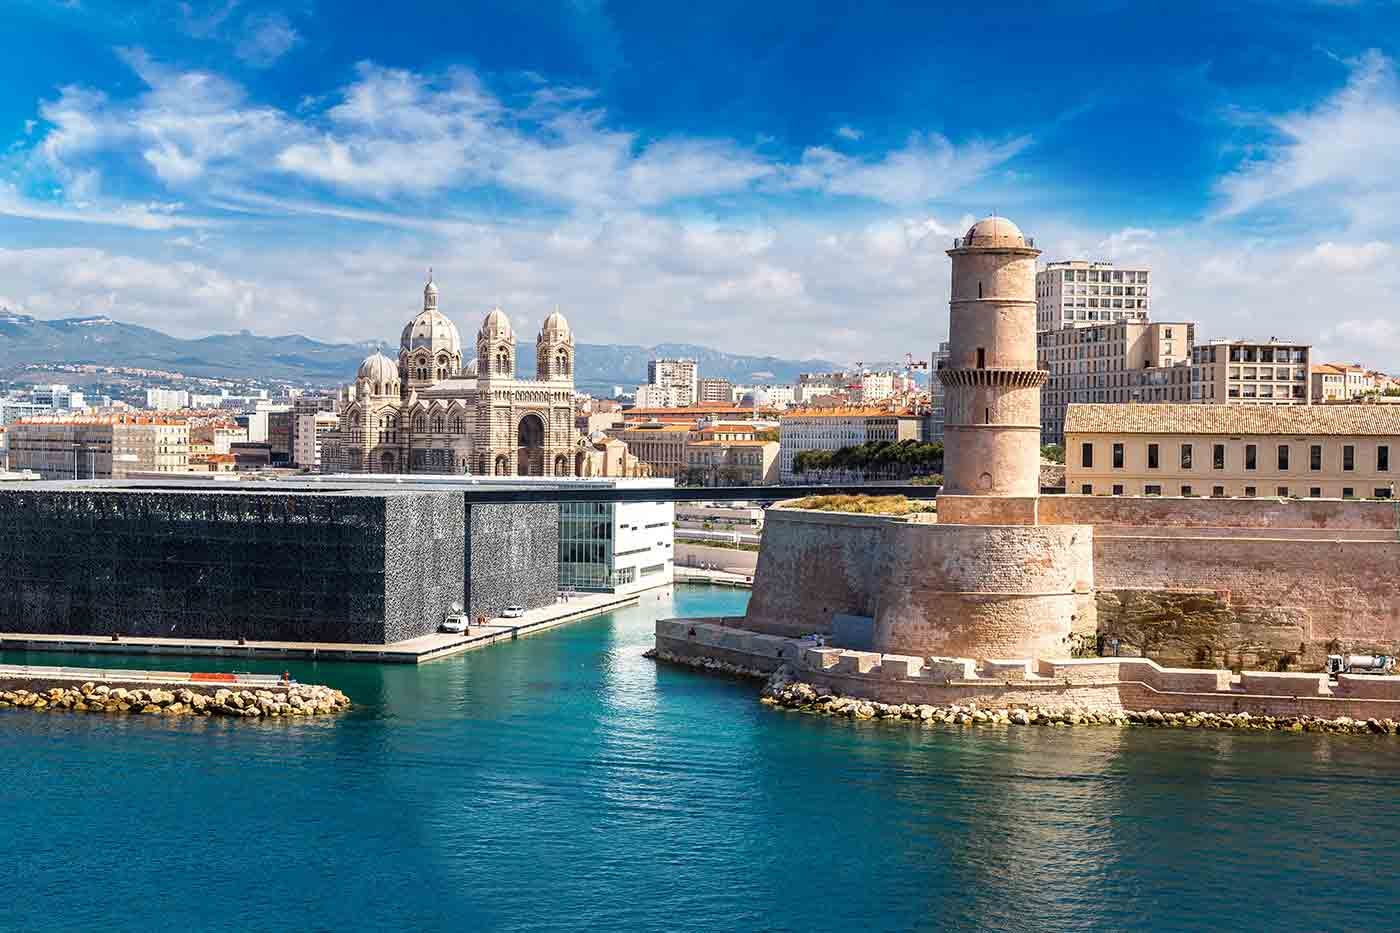 https://www.wideworldtrips.com/wp-content/uploads/2021/08/cool-things-to-do-in-marseille.jpg